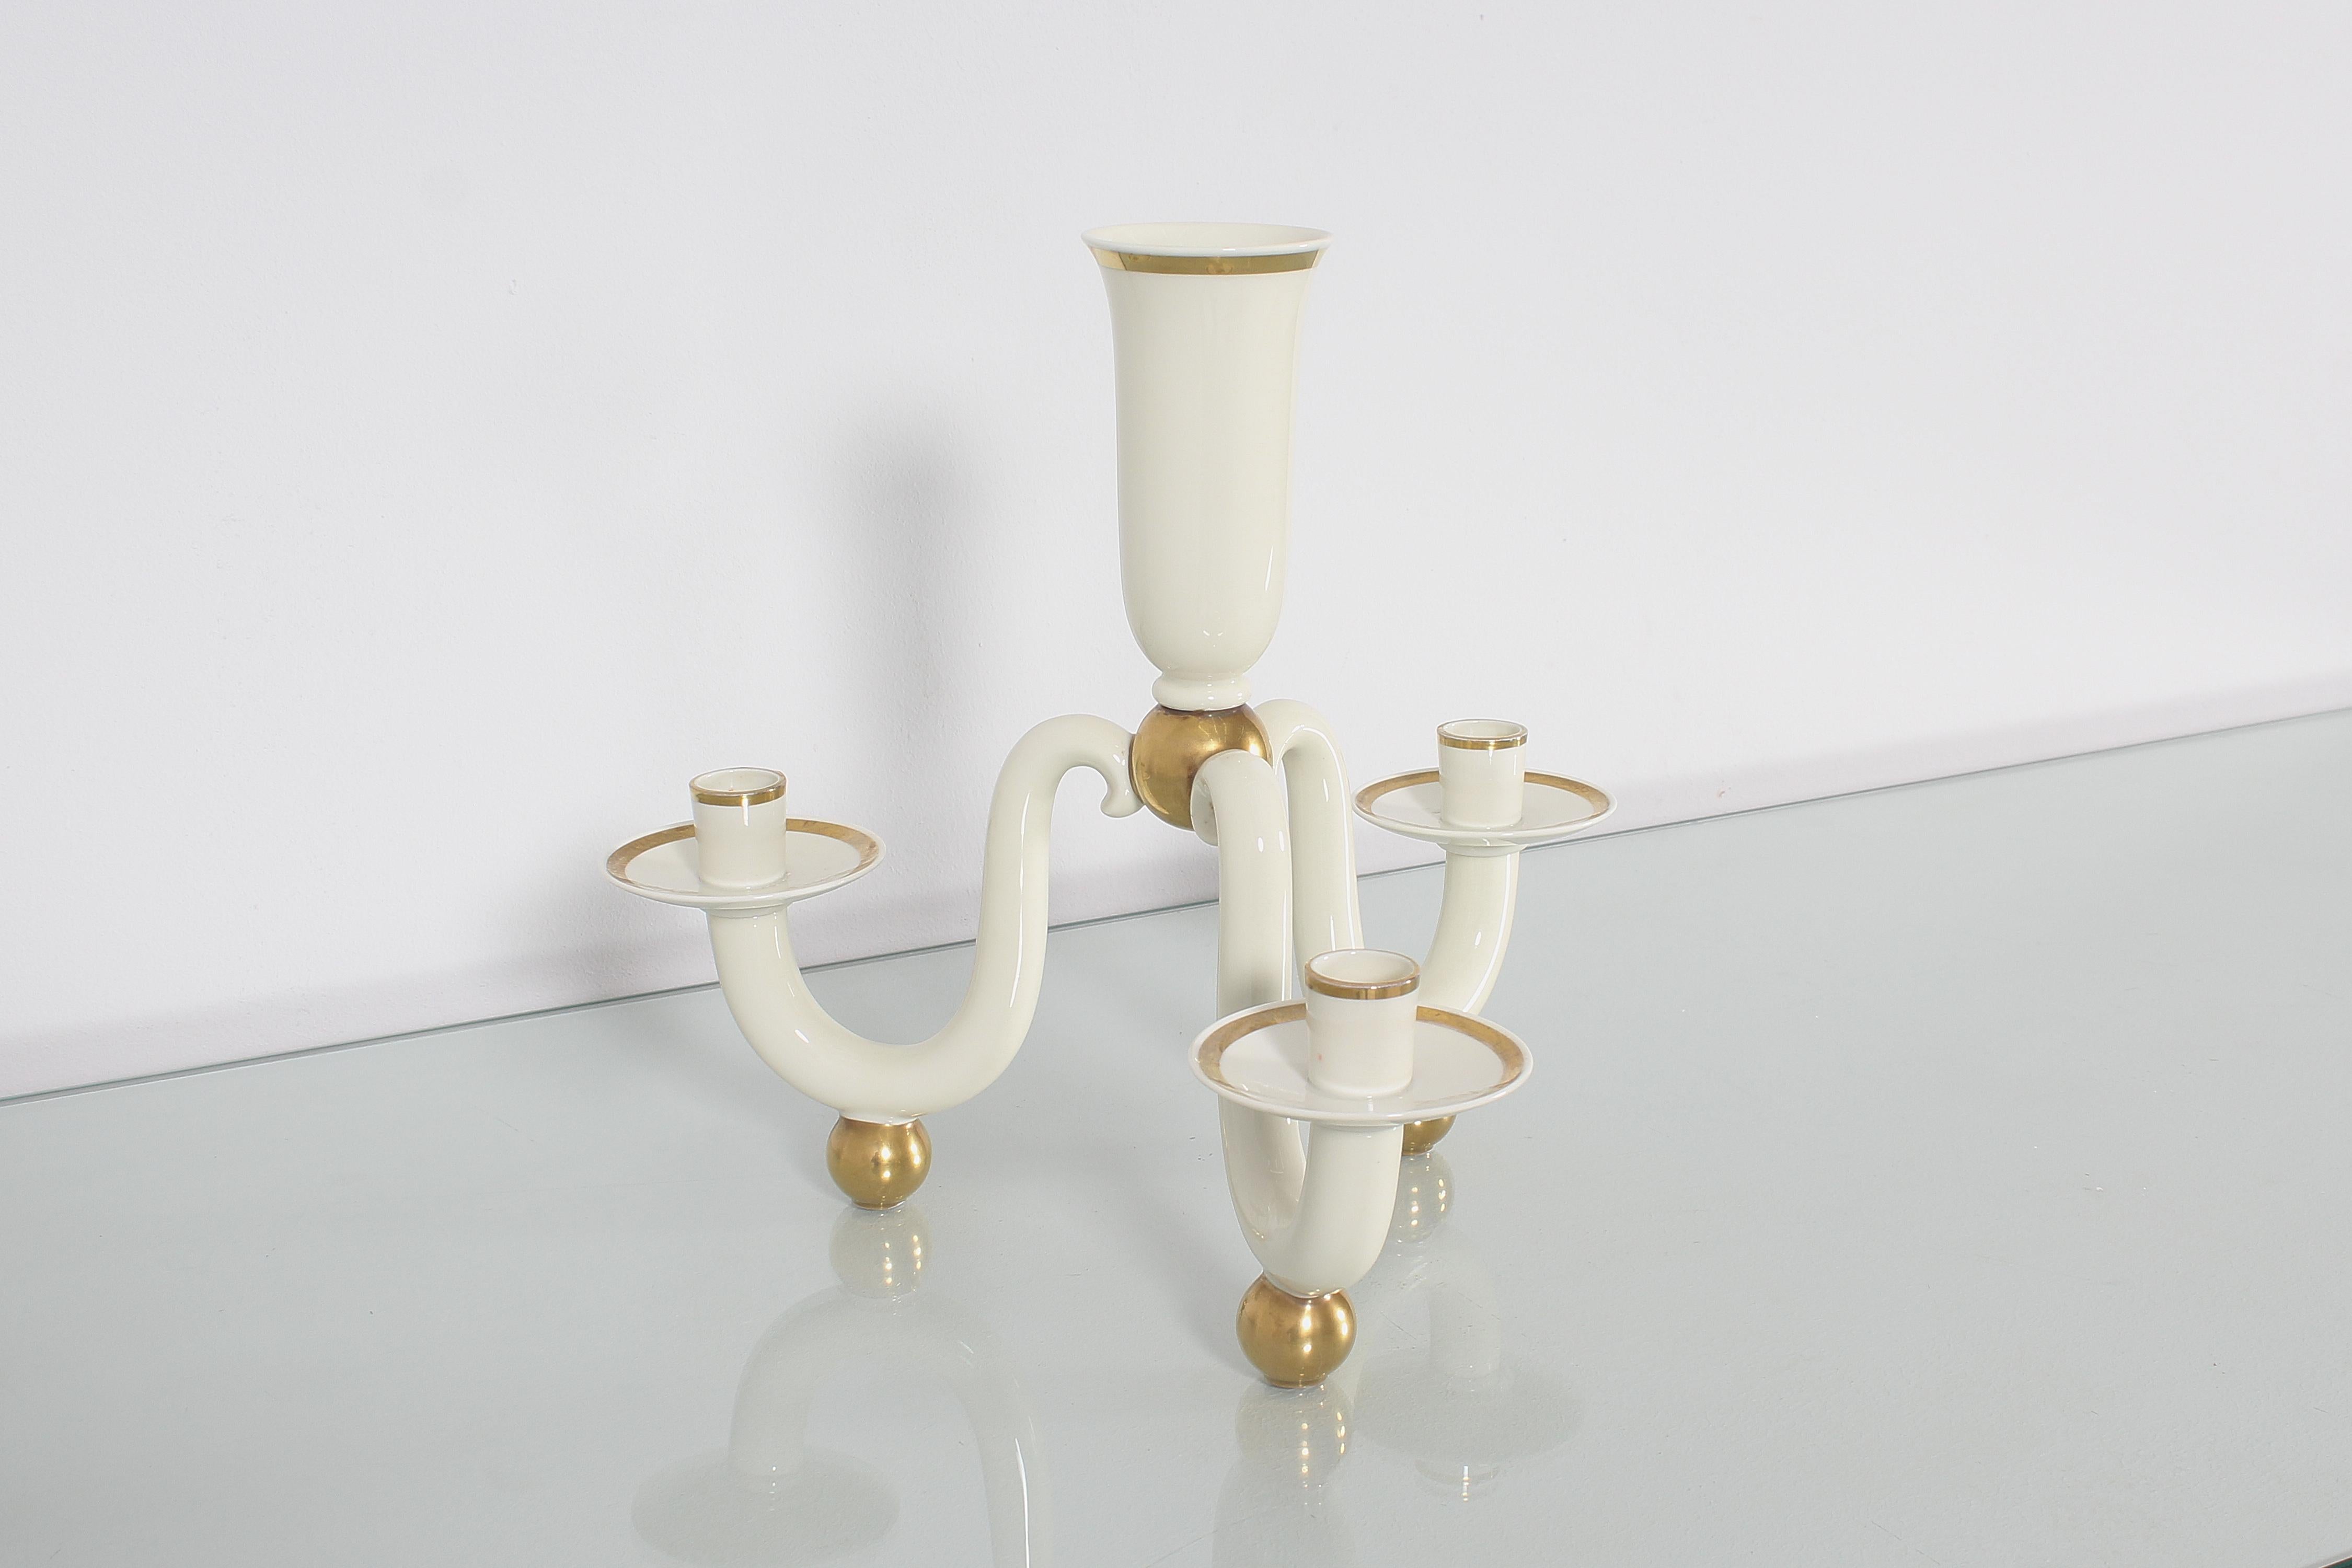 Refined classic style candelabra with three curved arms and a central body for a larger diameter candle, in very fine creamy white porcelain with golden profiles and support spheres, signed Rosenthal. Trademark printed under one of the three support